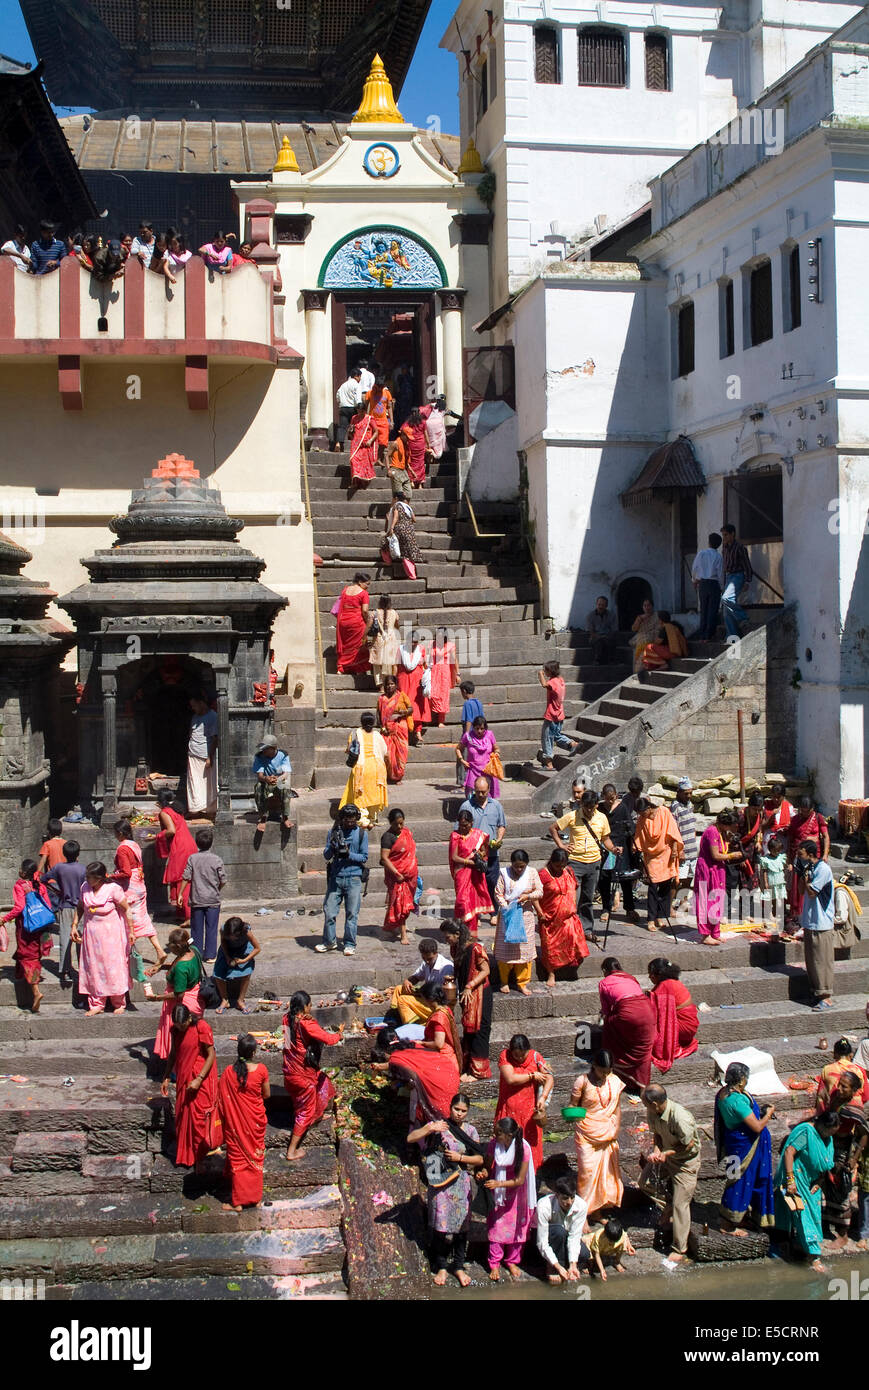 Festival for women, in which they dress in red and ask for blessings from Lord Shiva, Pashupatinath Temple, Kathmandu, Nepal Stock Photo